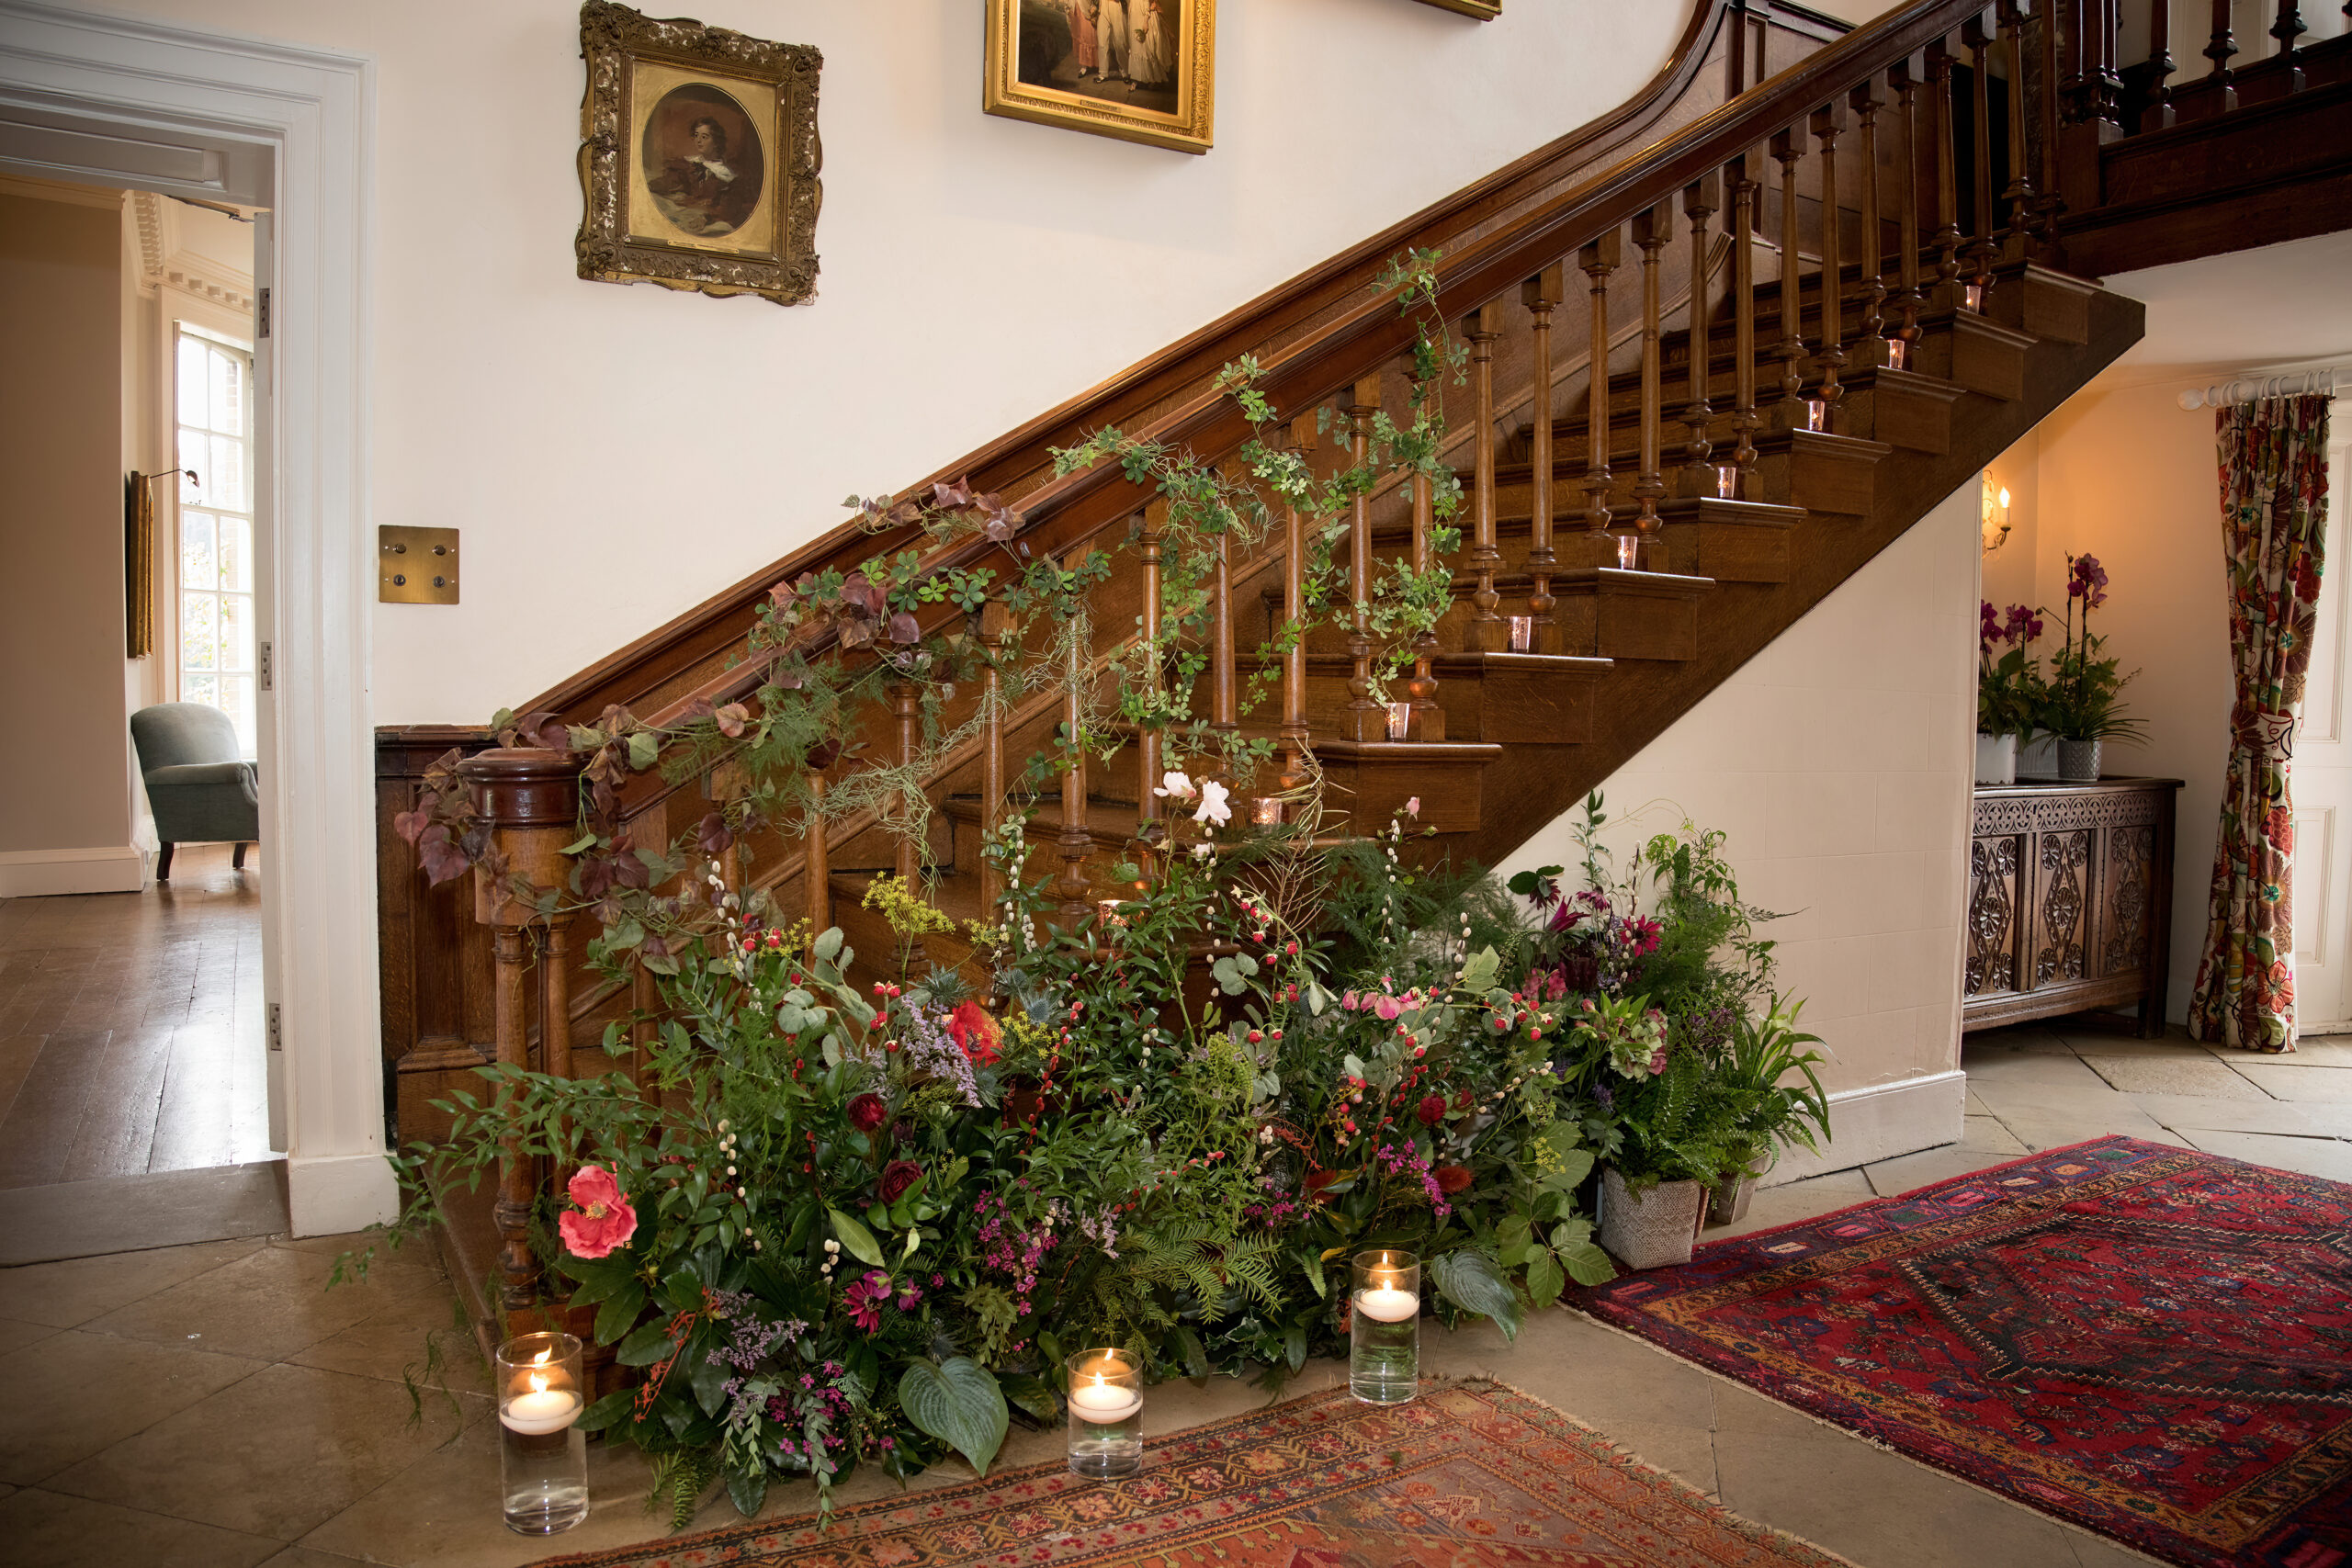 A wooden staircase has been dressed with garlands of ivy and red and berry flower arrangements surround the base of the staircase